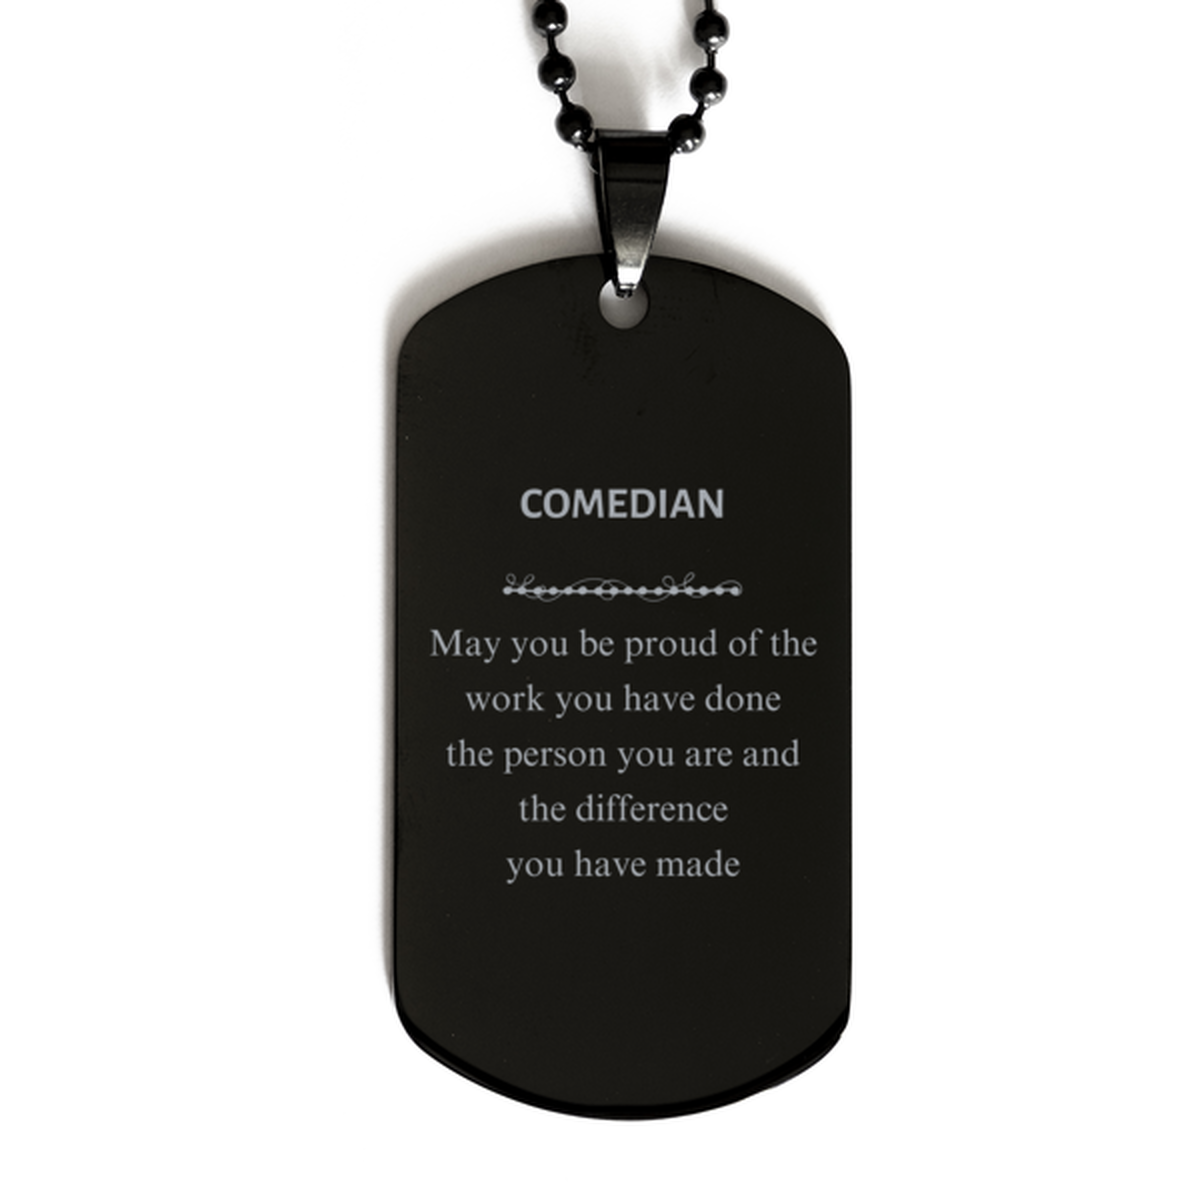 Comedian May you be proud of the work you have done, Retirement Comedian Black Dog Tag for Colleague Appreciation Gifts Amazing for Comedian